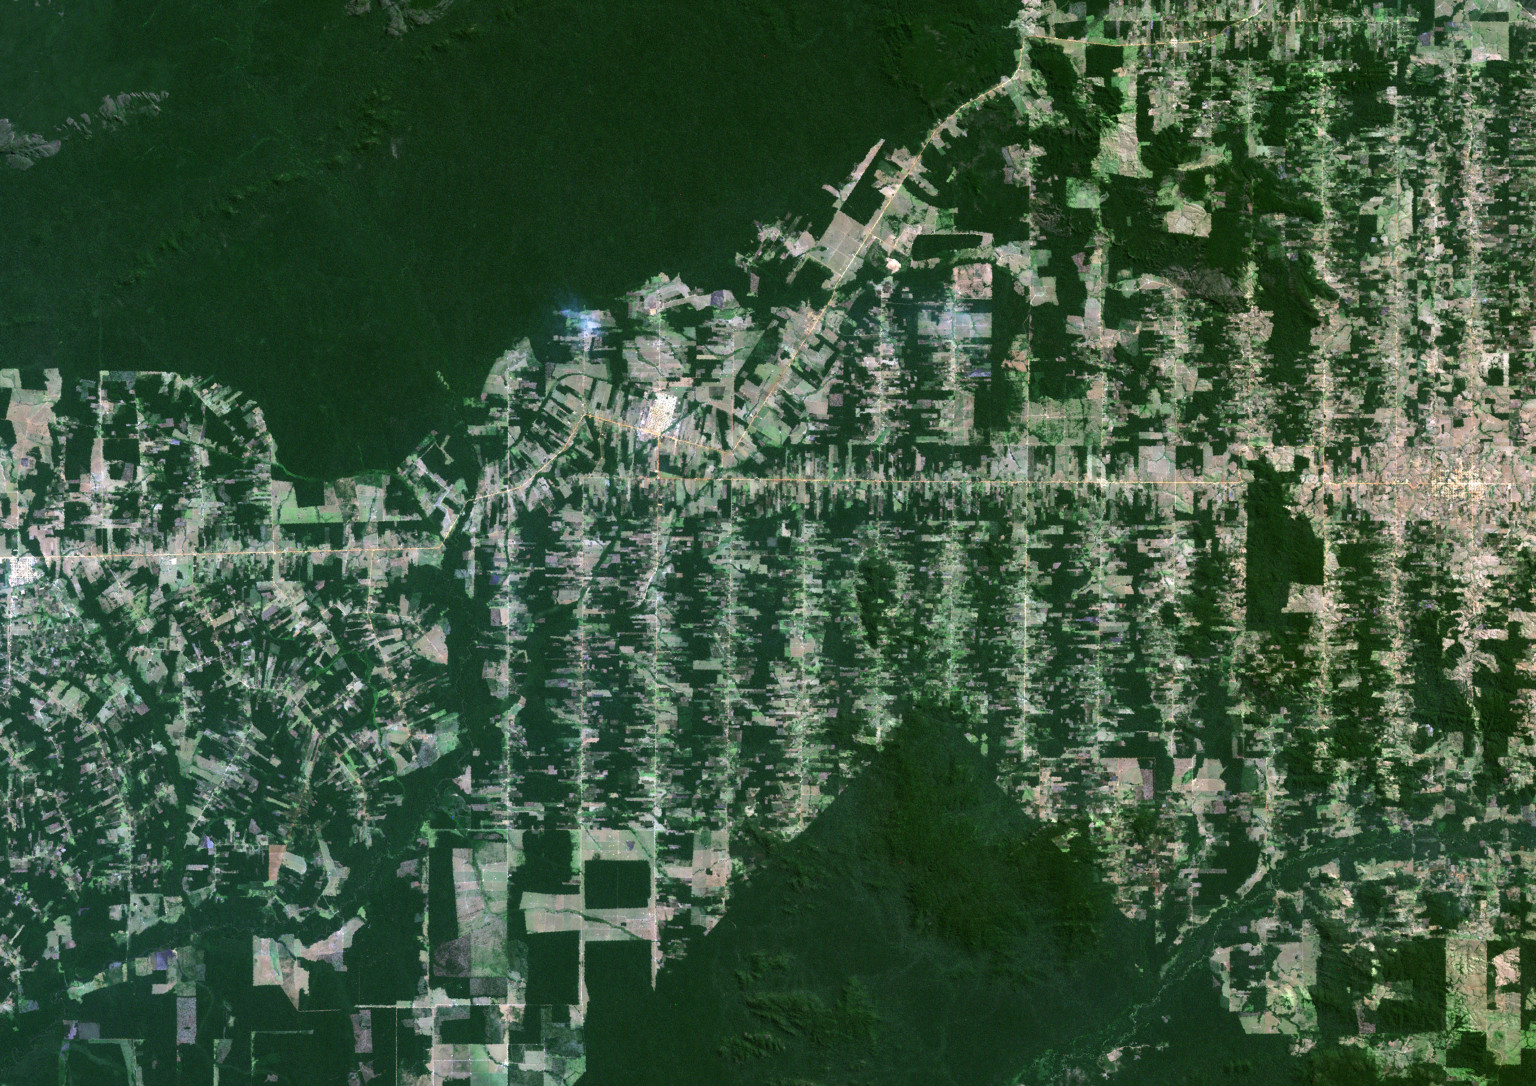 Amazon Deforestation Spikes In Brazil, According To Photos From Country ...